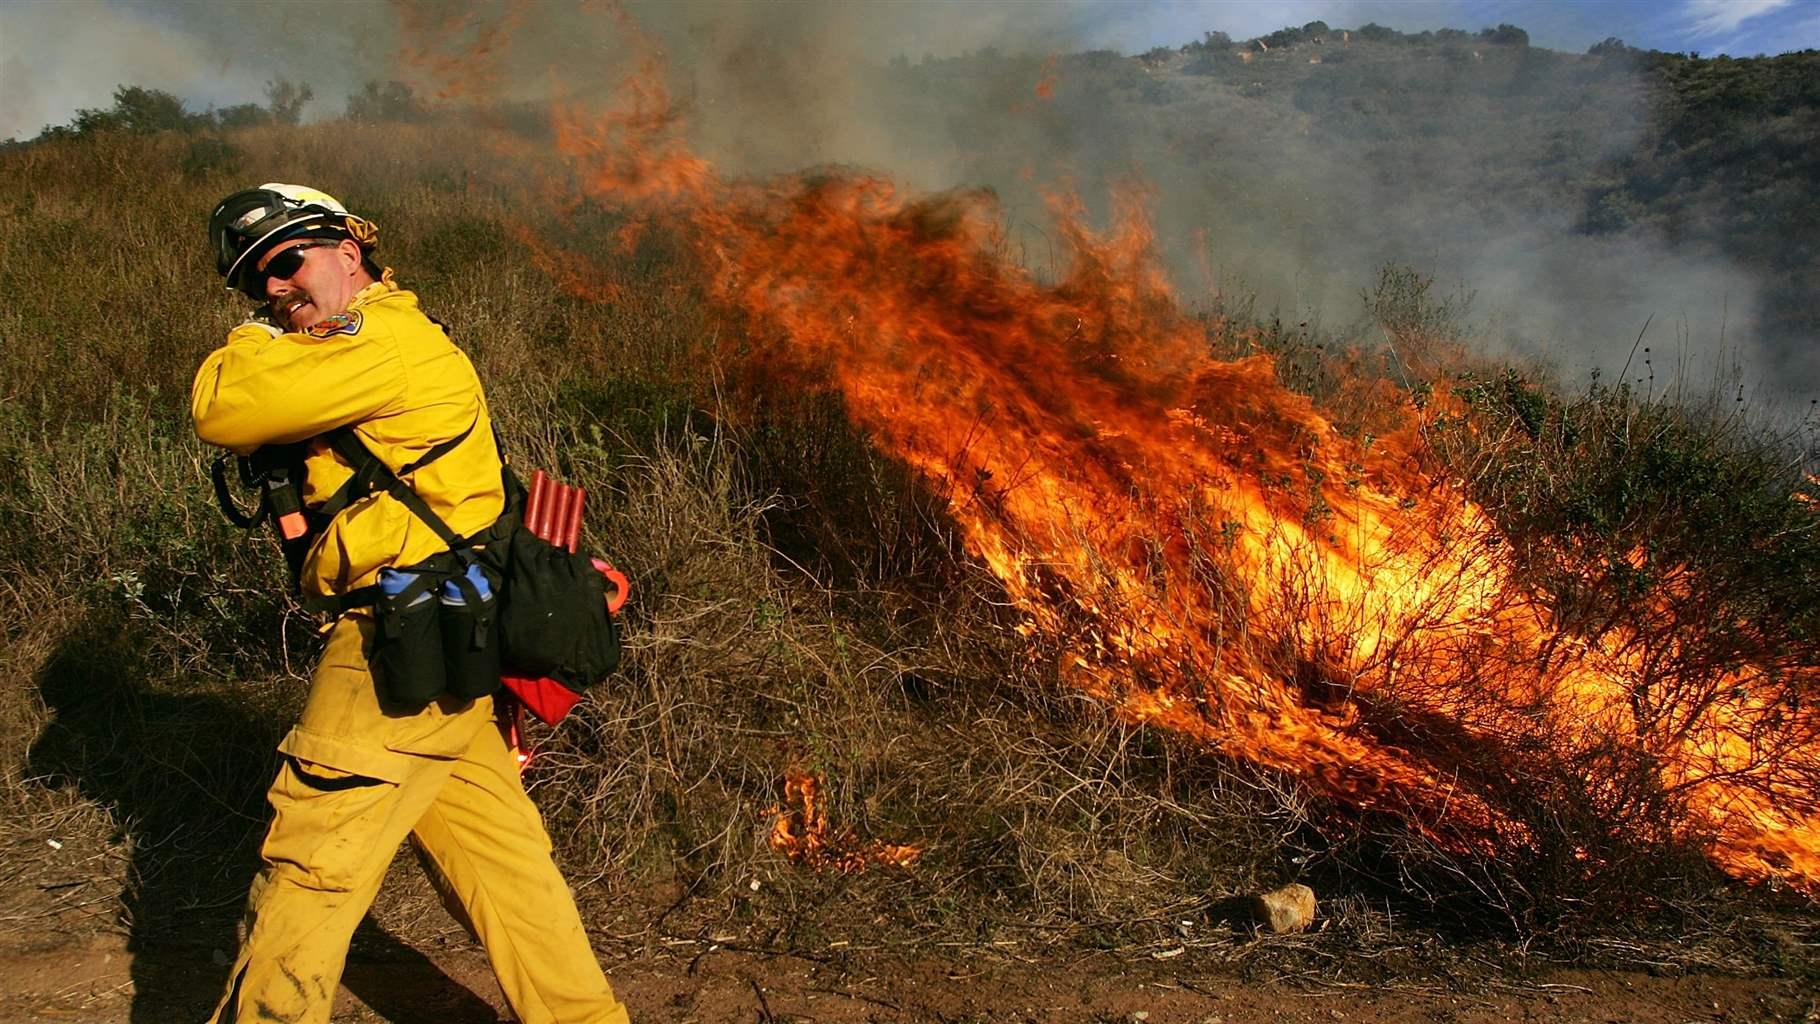 A firefighter in yellow gear turns away from a wildfire with flames and smoke visible in a grassy area.